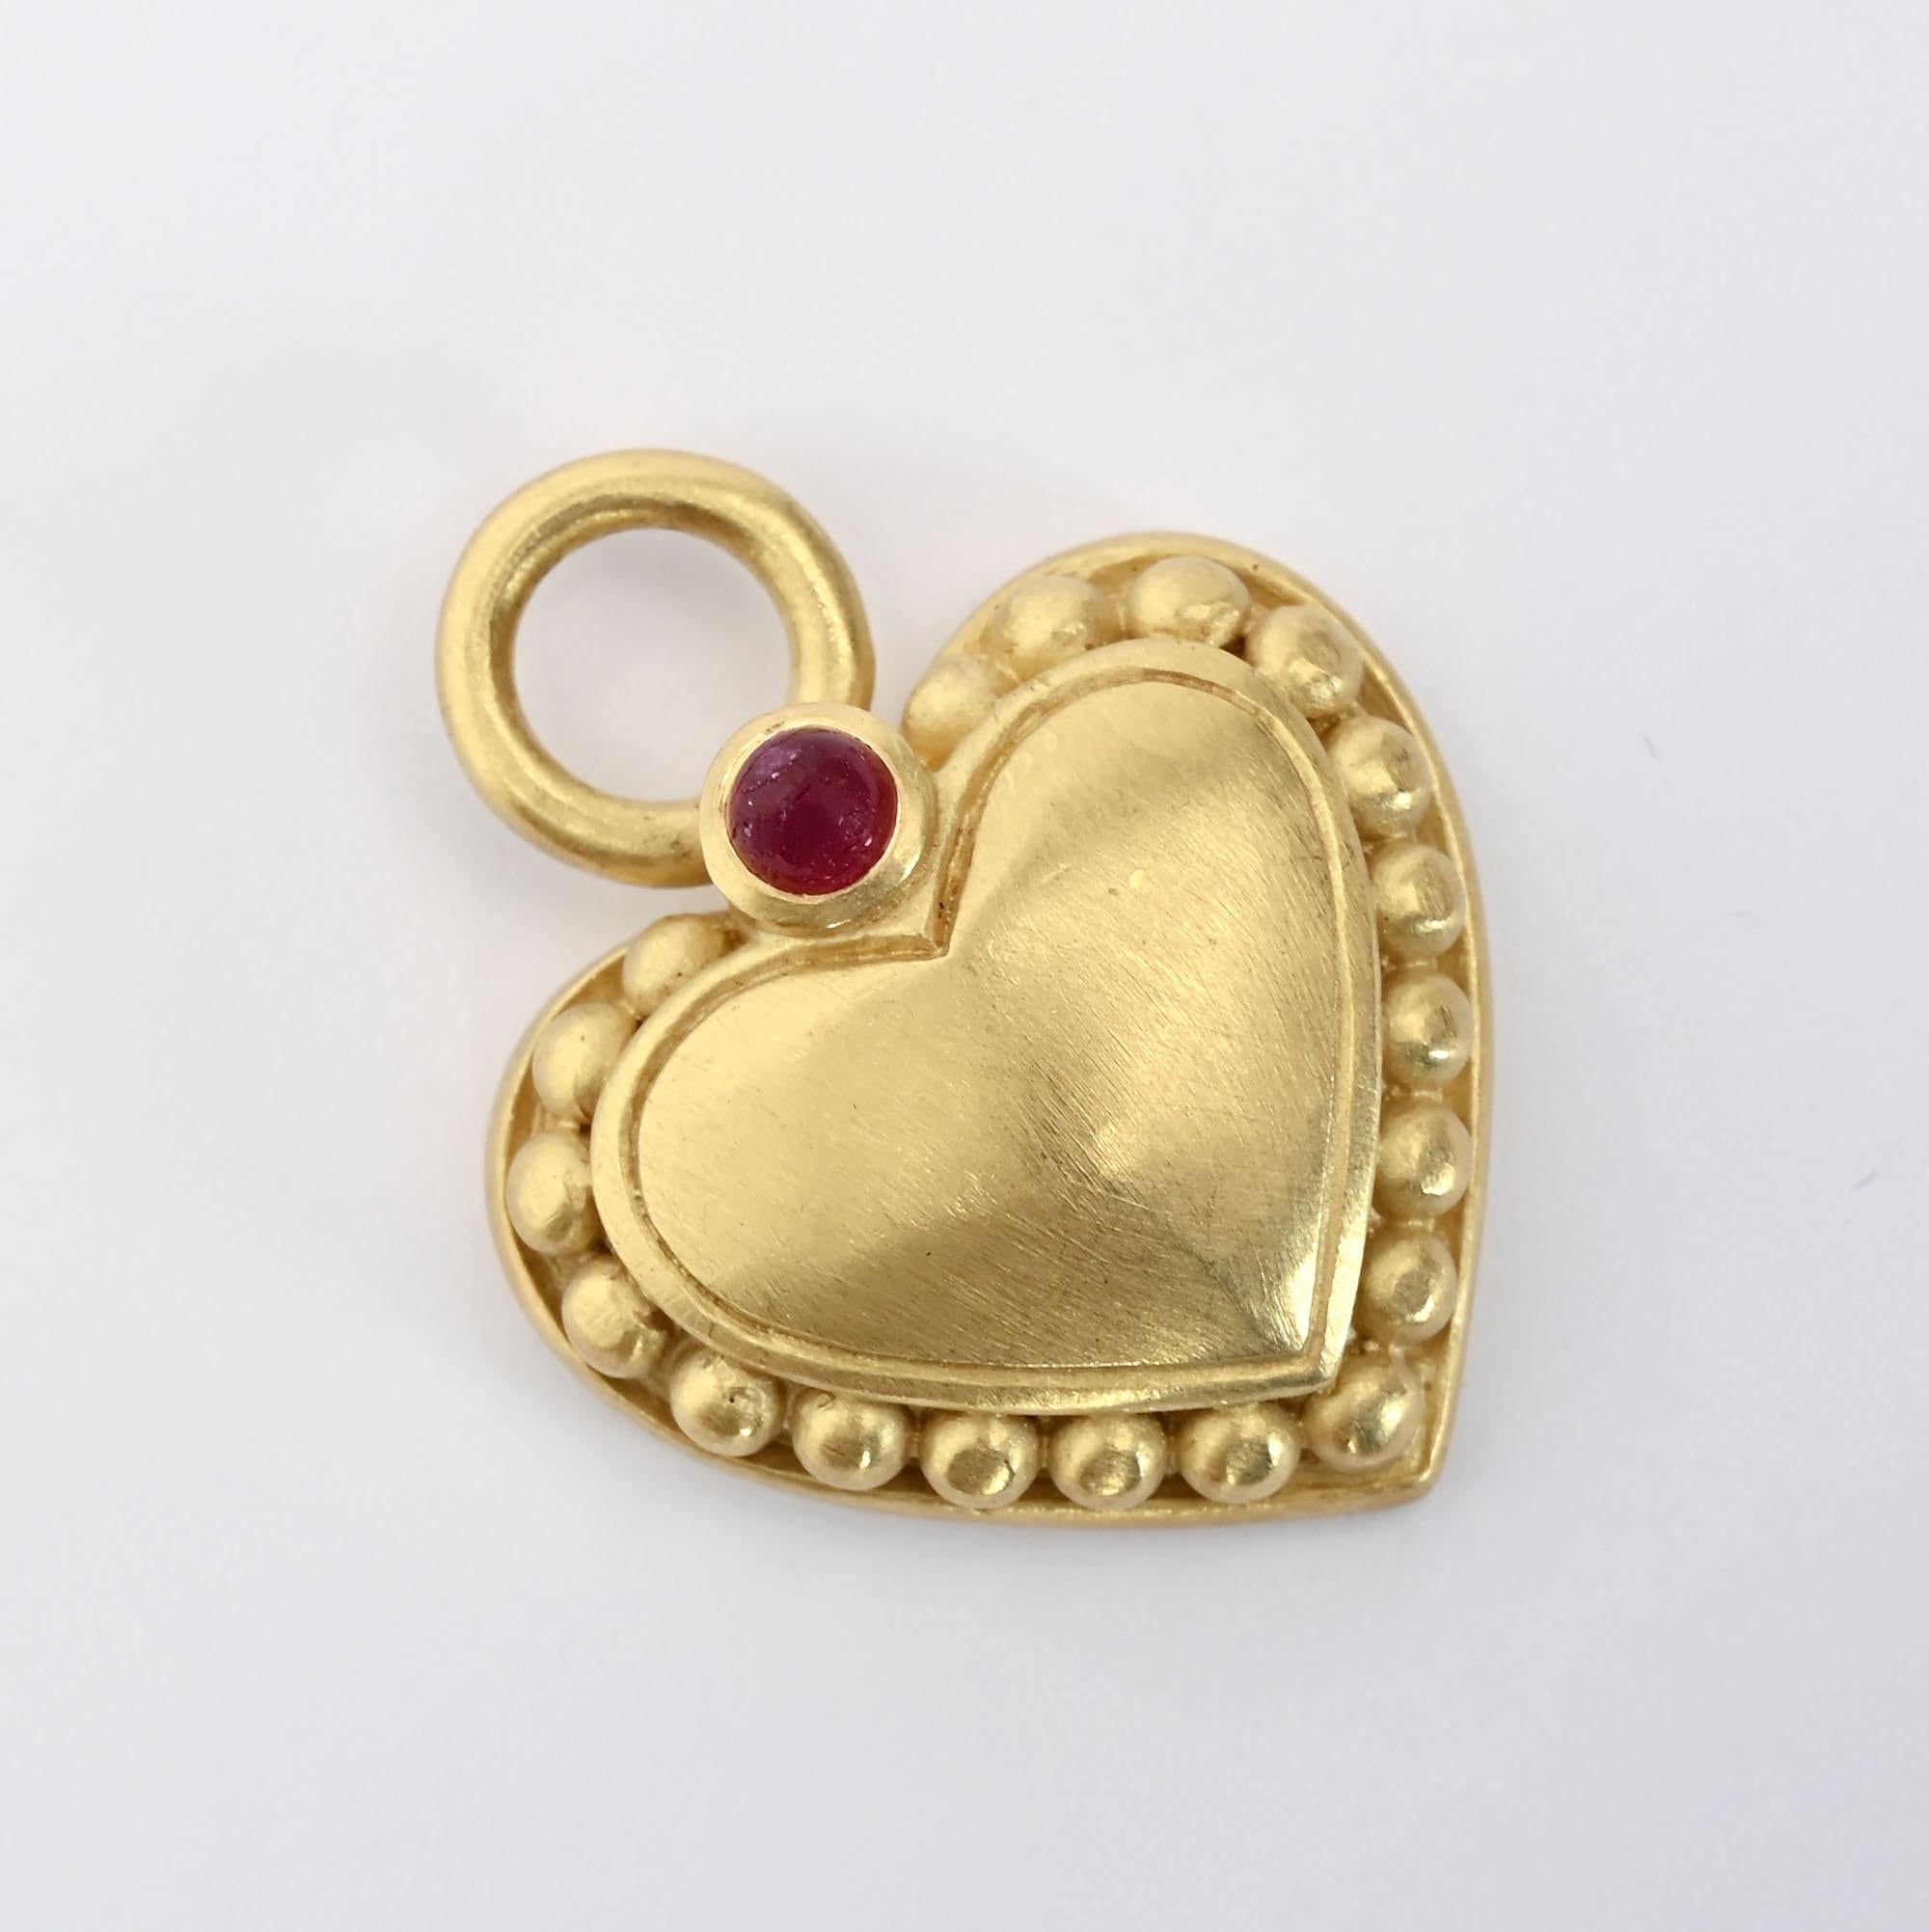 Beautifully made 18 karat gold pendant by Judith Ripka. The heart has a softly brushed finish and three dimensional balls around the interior. It is topped with a cabochon ruby. The heart measures 1 1/4 inches from top to bottom including the loop.